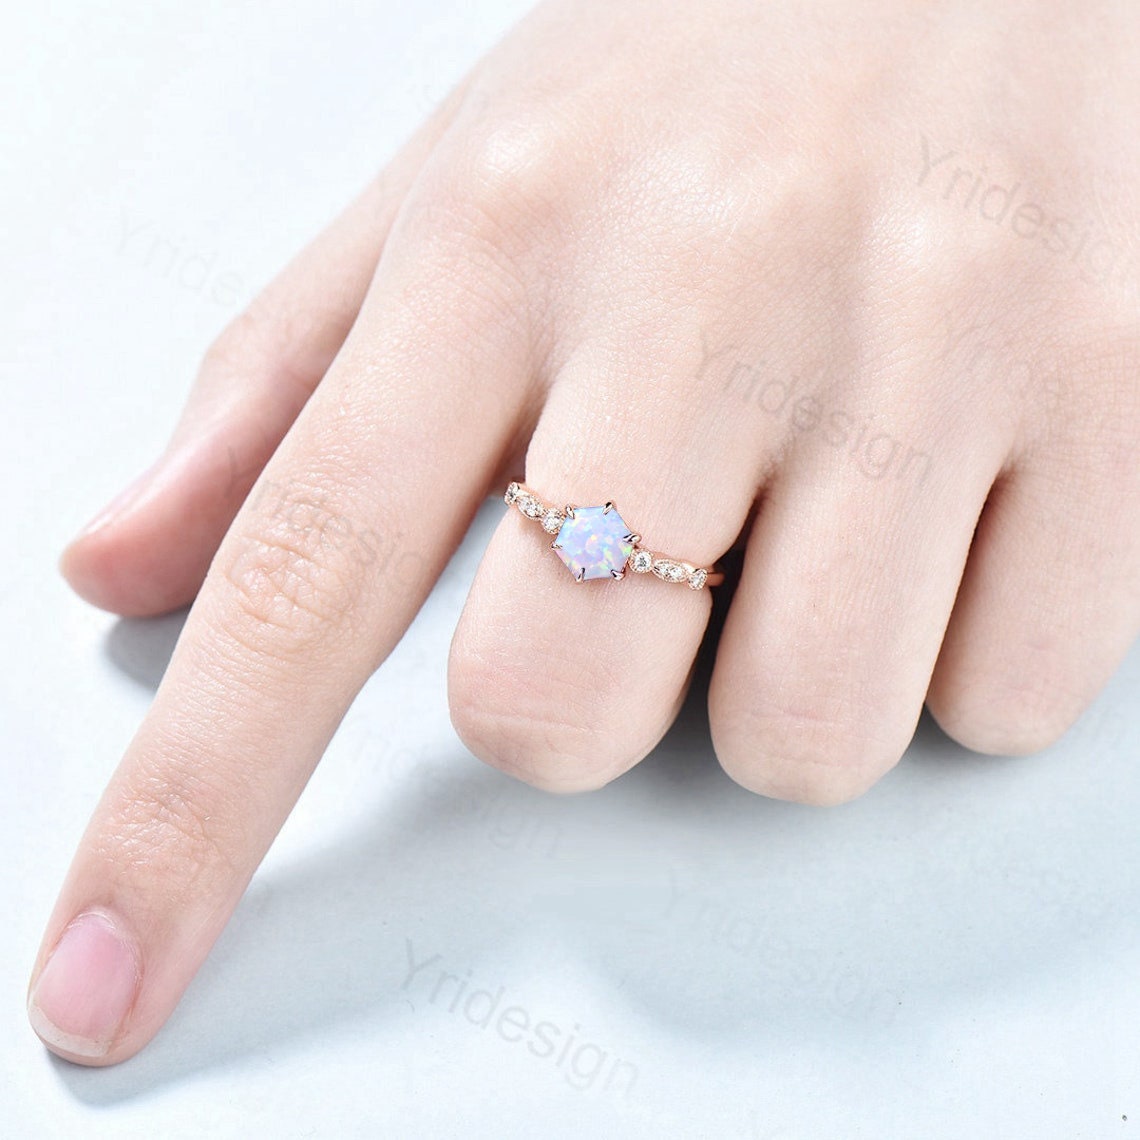 Hexagon opal ring dainty vintage white opal engagement ring art deco 6 prongs sterling silver simulated CZ bride ring for women promise ring - PENFINE